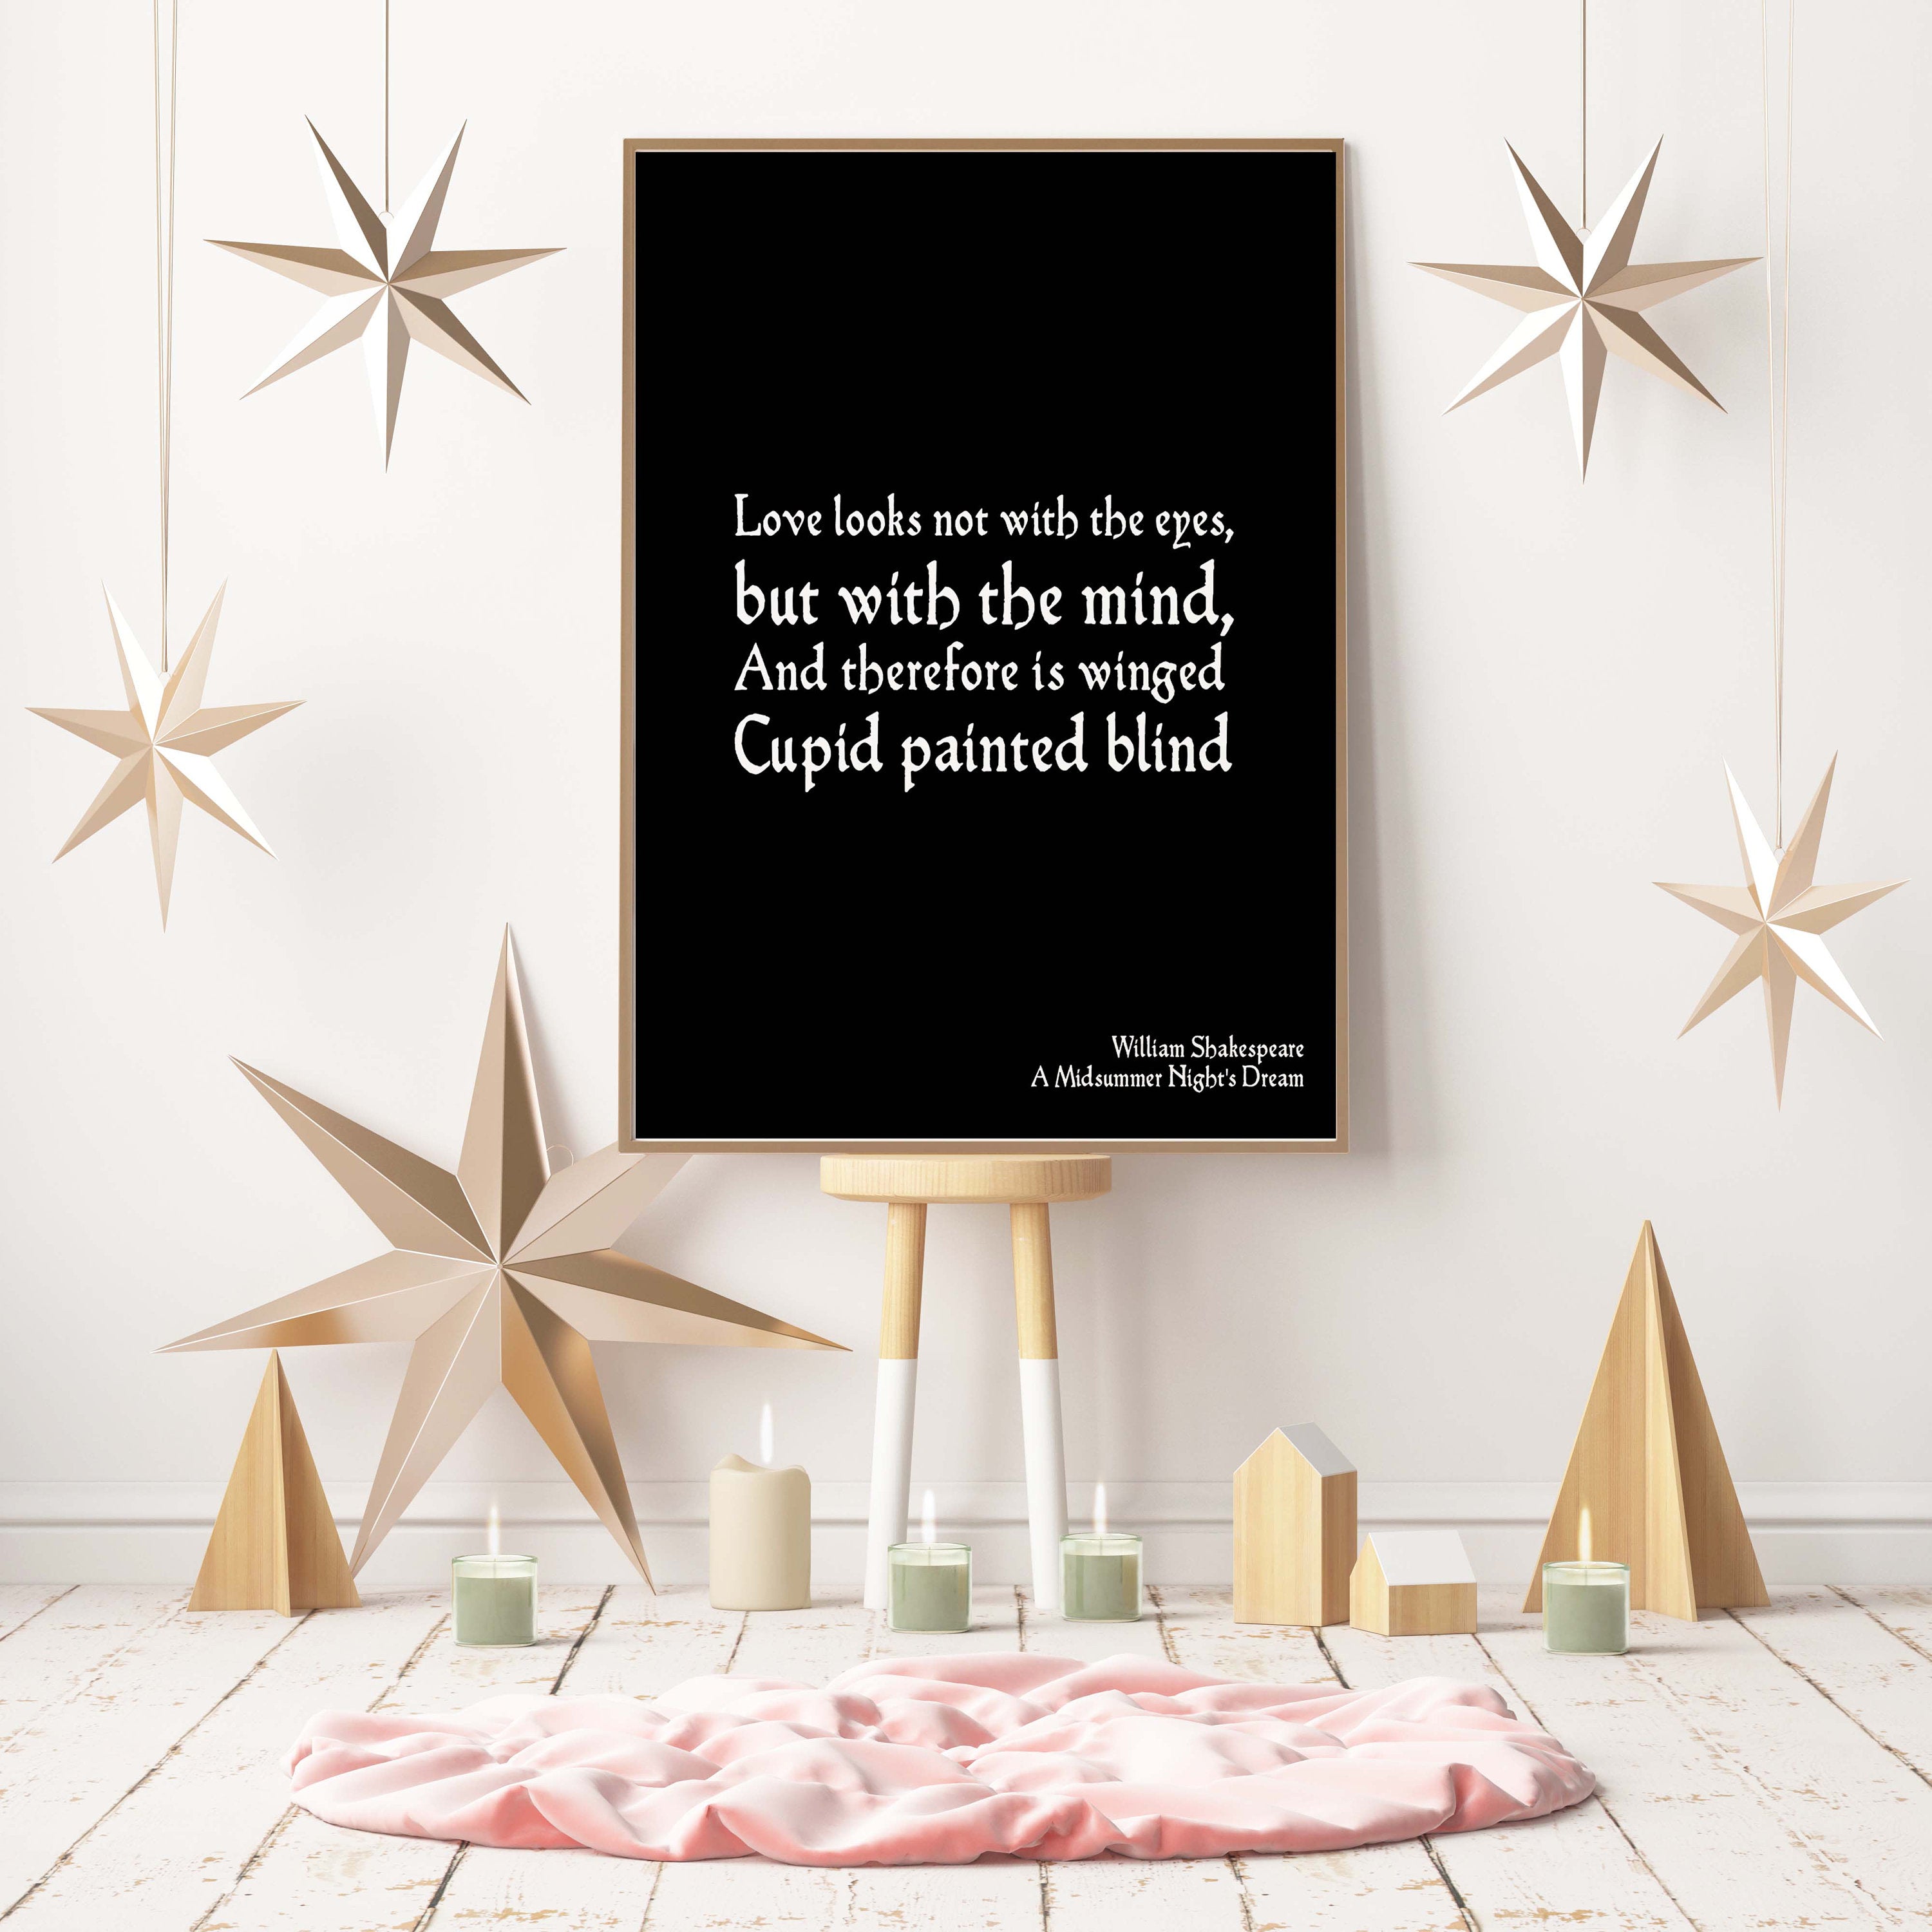 Midsummer Nights Dream Shakespeare Love Looks Not With The Eyes - BookQuoteDecor